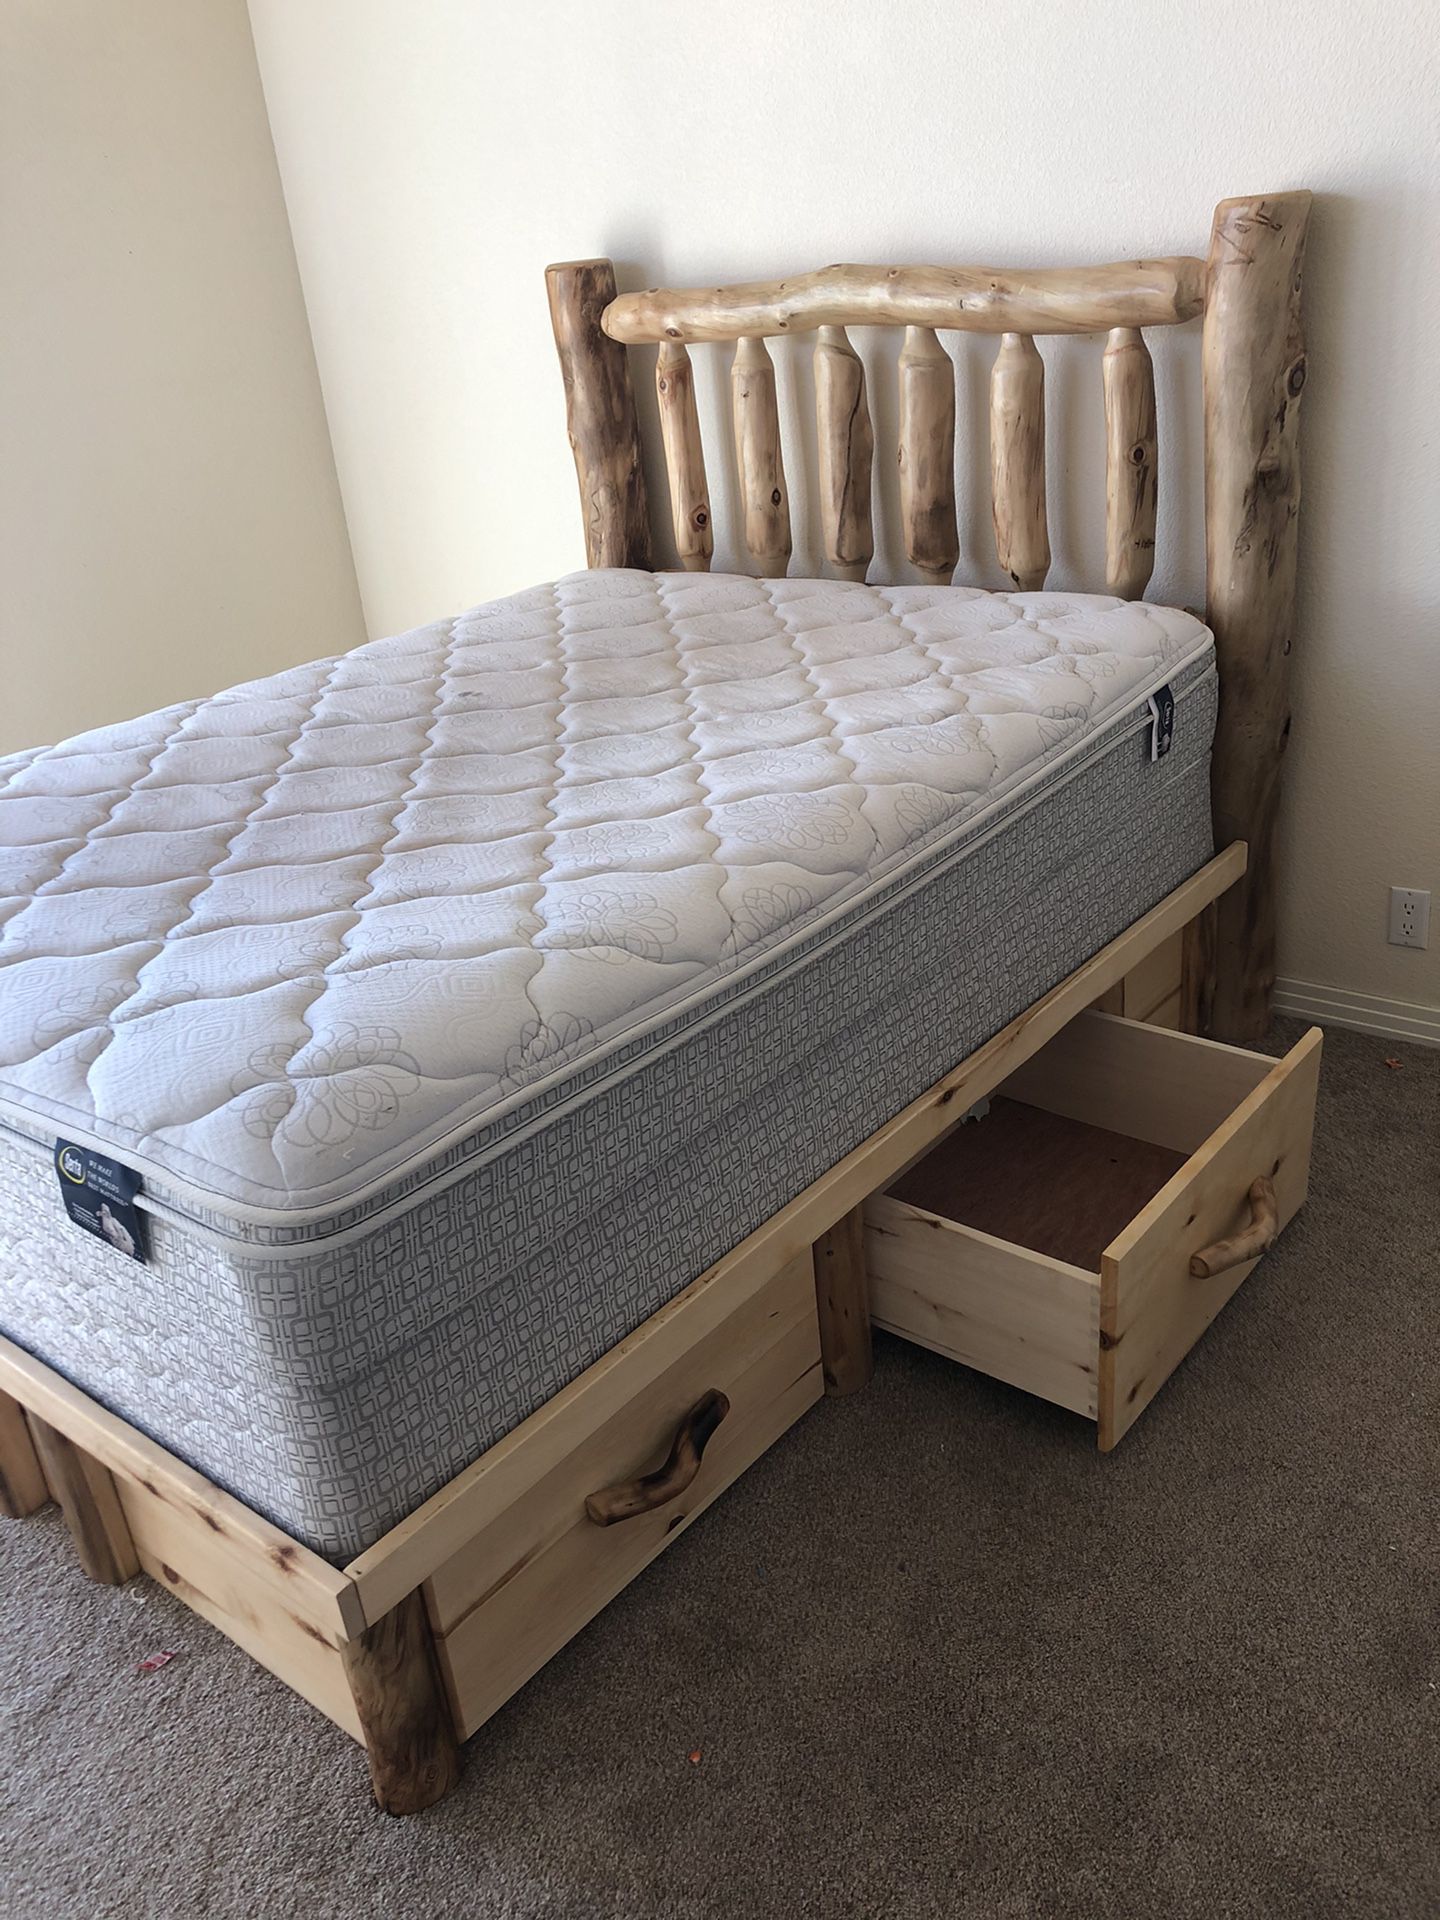 Queen size captain’s bed complete w/ mattress and box spring